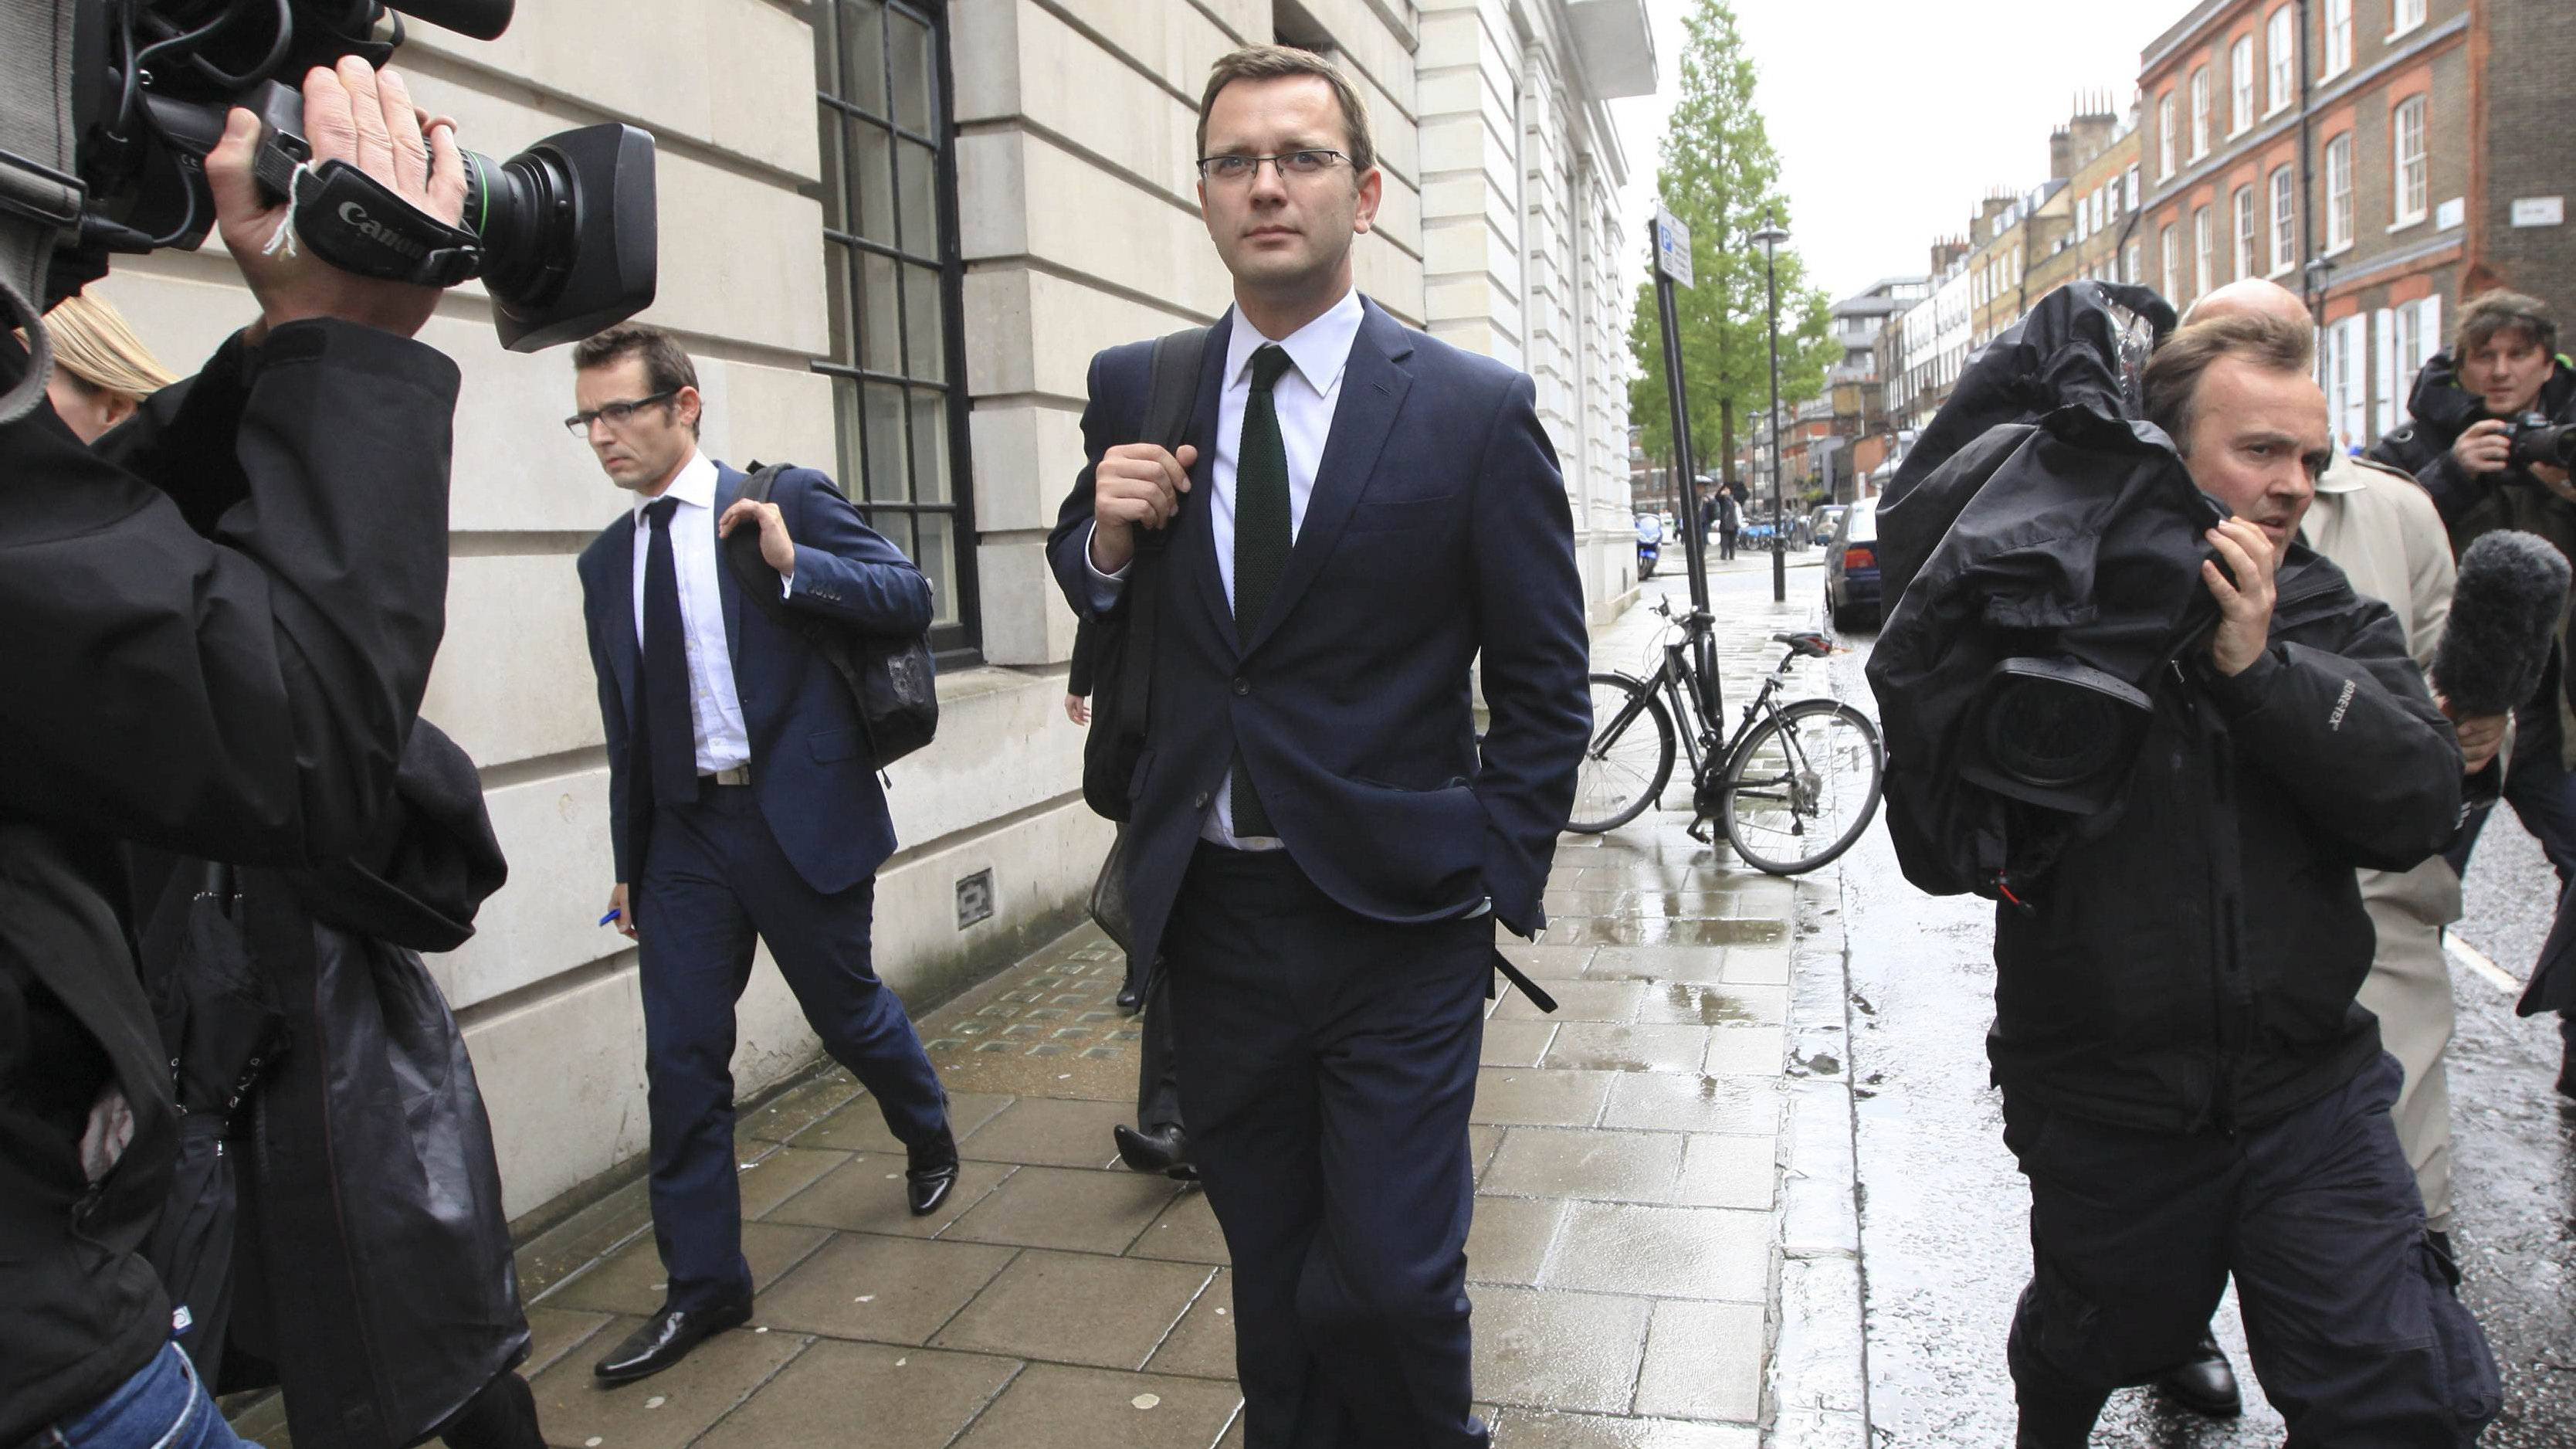 With latest arrest, Andy Coulsons past comes back to haunt image